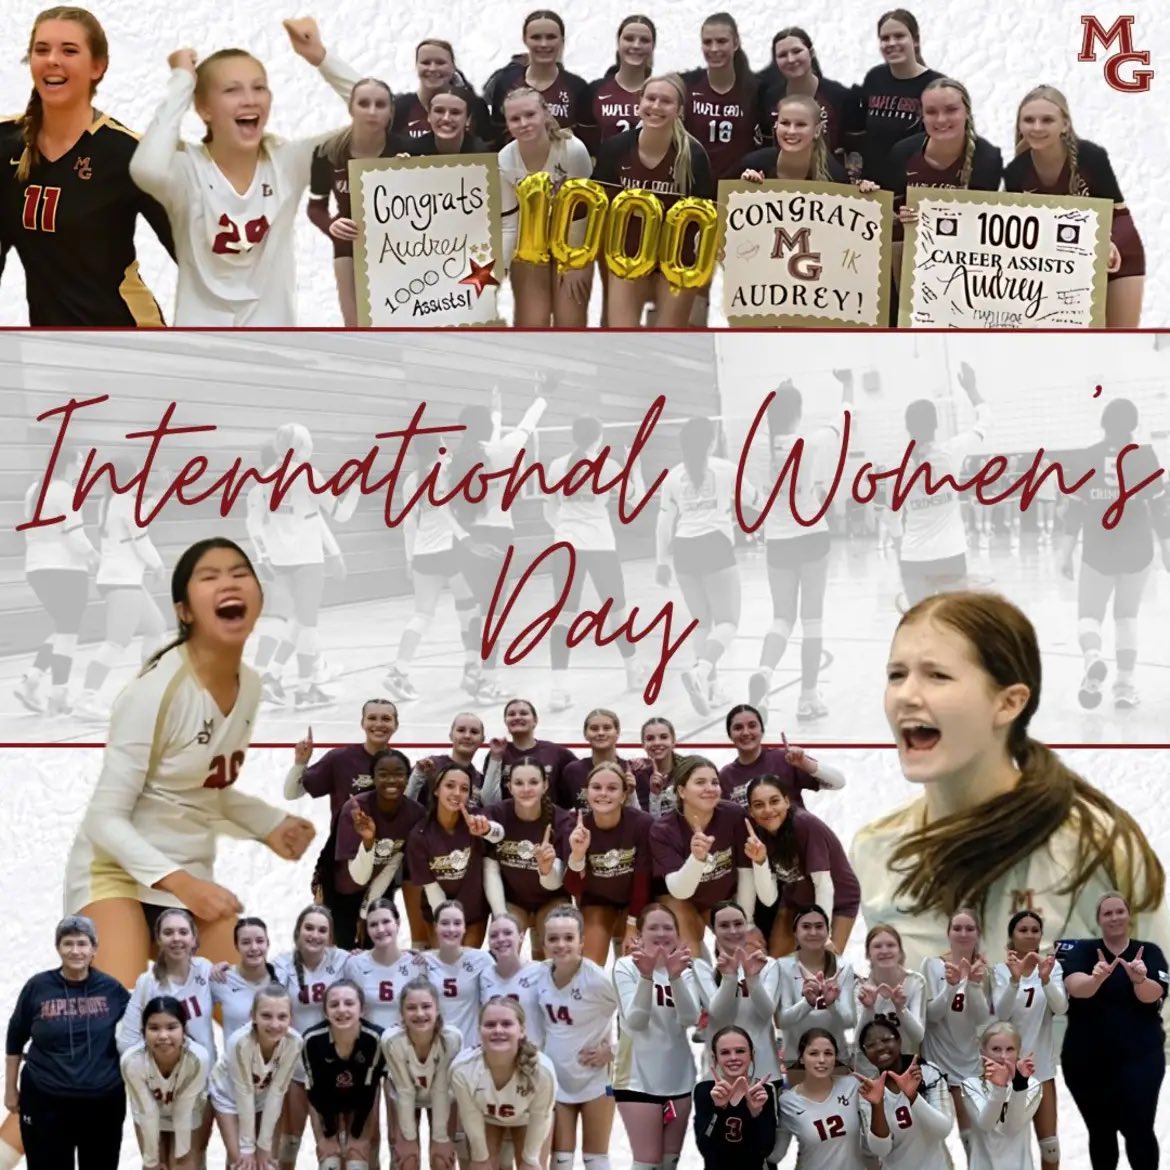 Today and every day, we celebrate the on- and off-court achievements of all the wonderful women in our program. Keep paving your way in this world as we witness history in the making!

#WeAreCrimson #InternationalWomensDay